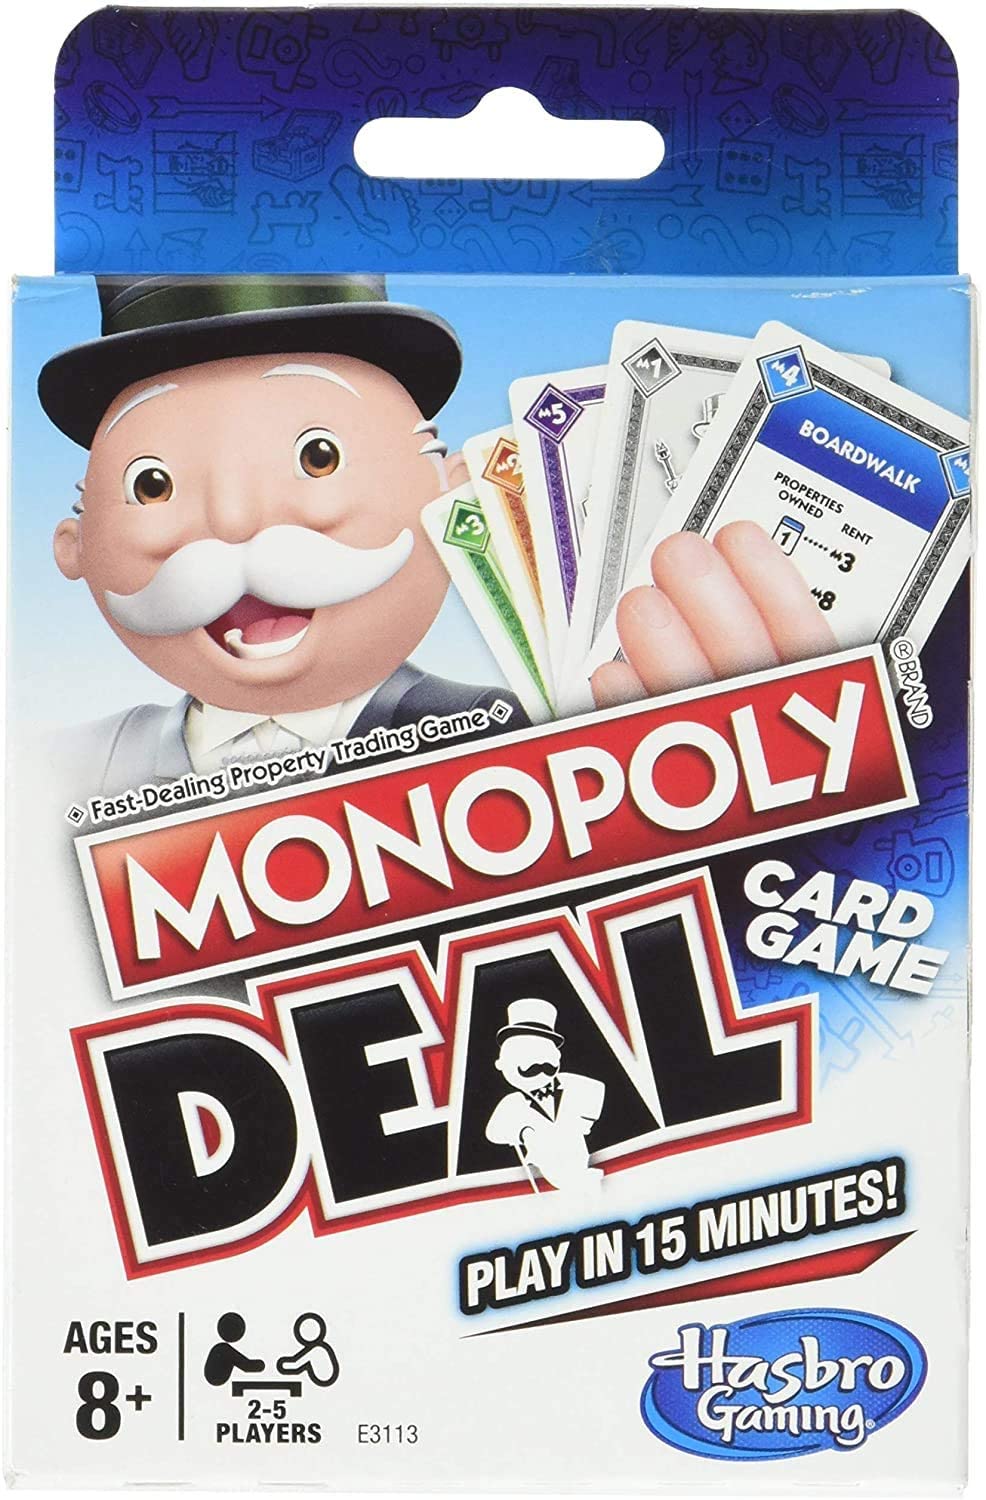 HASBRO  Monopoly Deal: is a fast-paced, totally addictive card game that you can play in minutes! Deal and steal your way to success - E3113